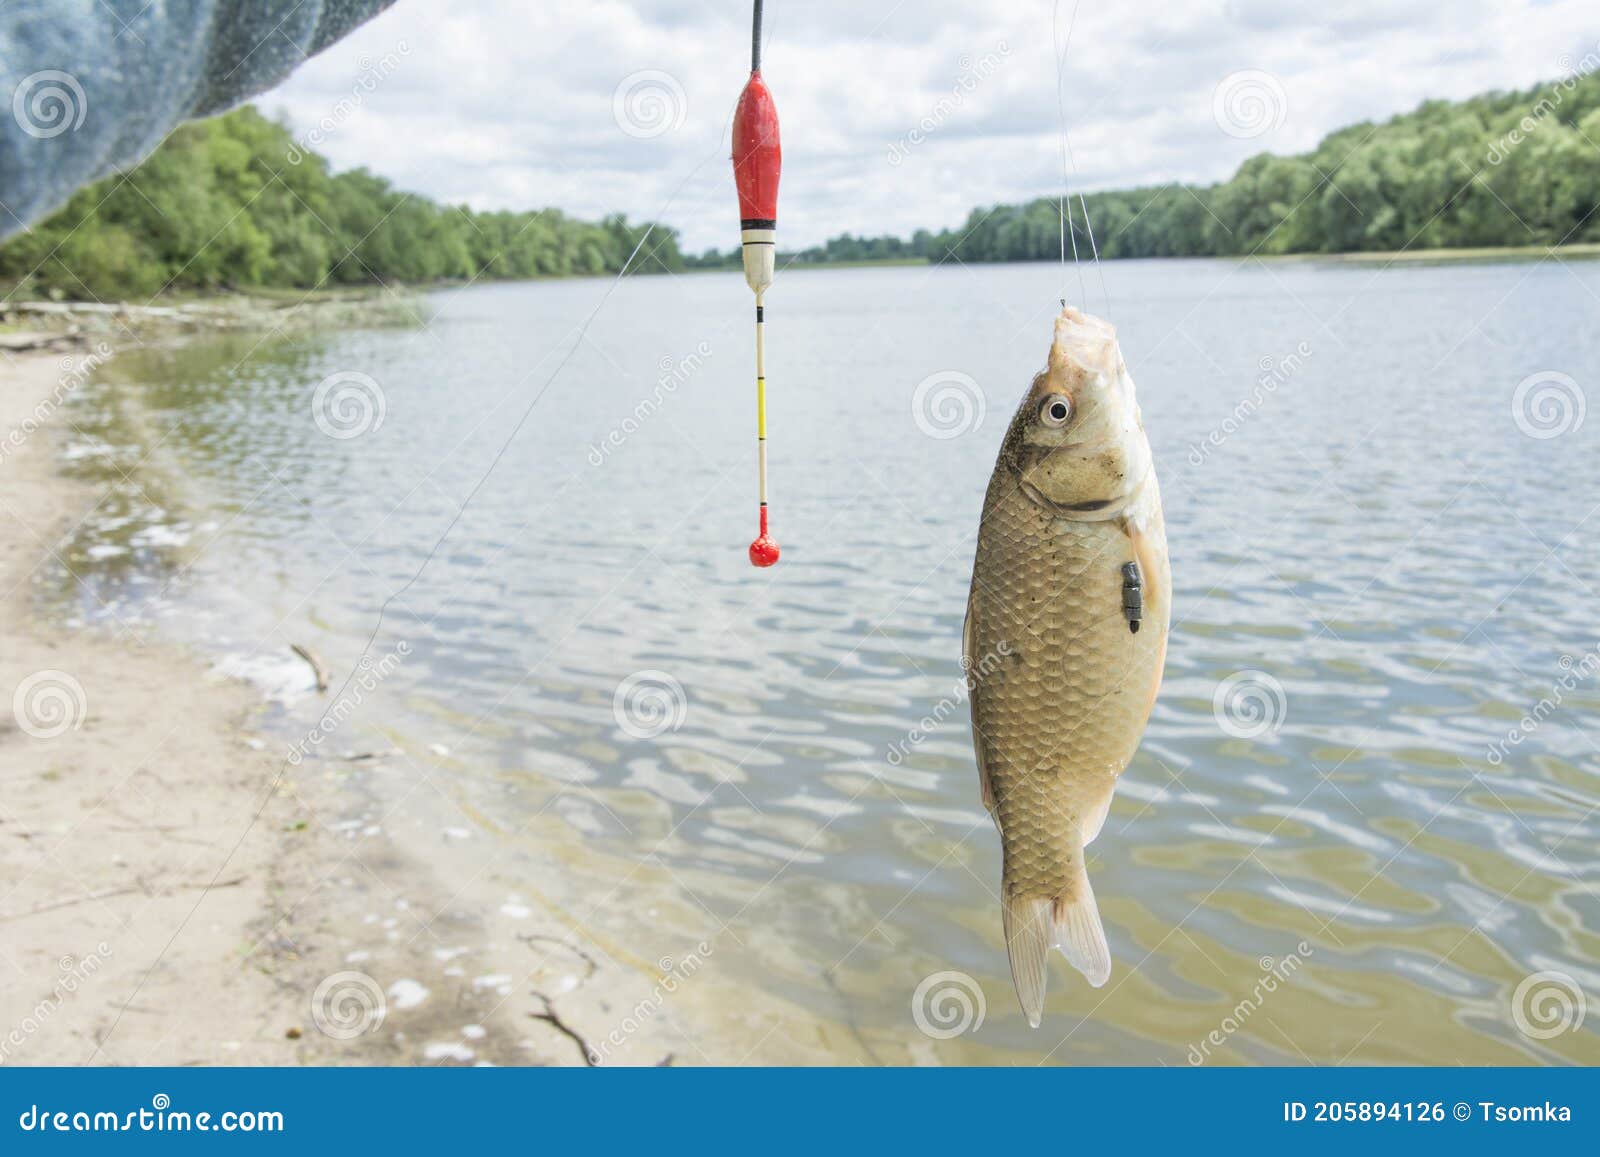 https://thumbs.dreamstime.com/z/summer-bright-sunny-day-crucian-carp-fishing-line-float-summer-sunny-day-crucian-carp-fishing-205894126.jpg